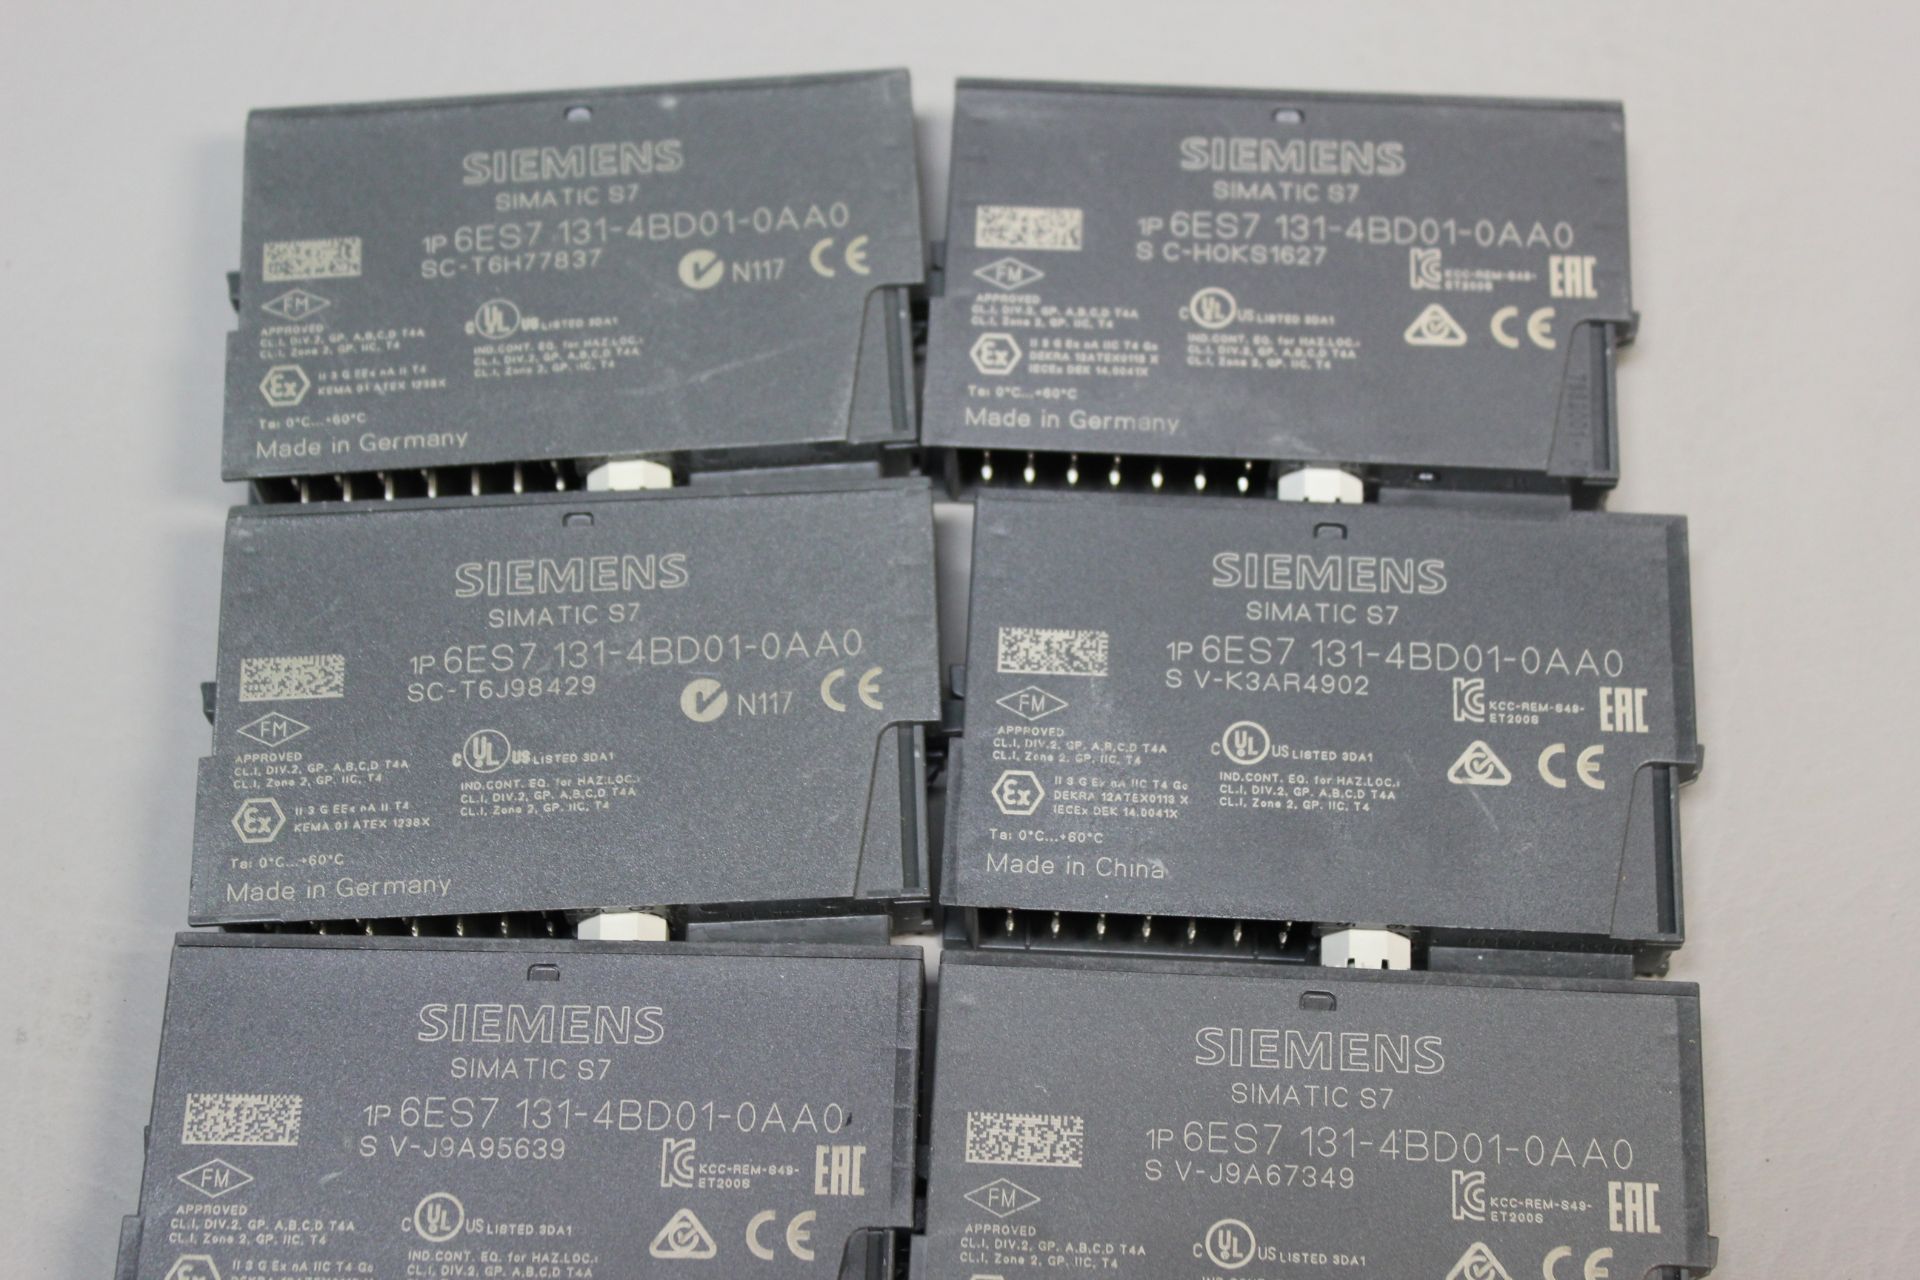 LOT OF SIEMENS SIMATIC S7 DIGITAL ELECTRONIC MODULES - Image 4 of 6